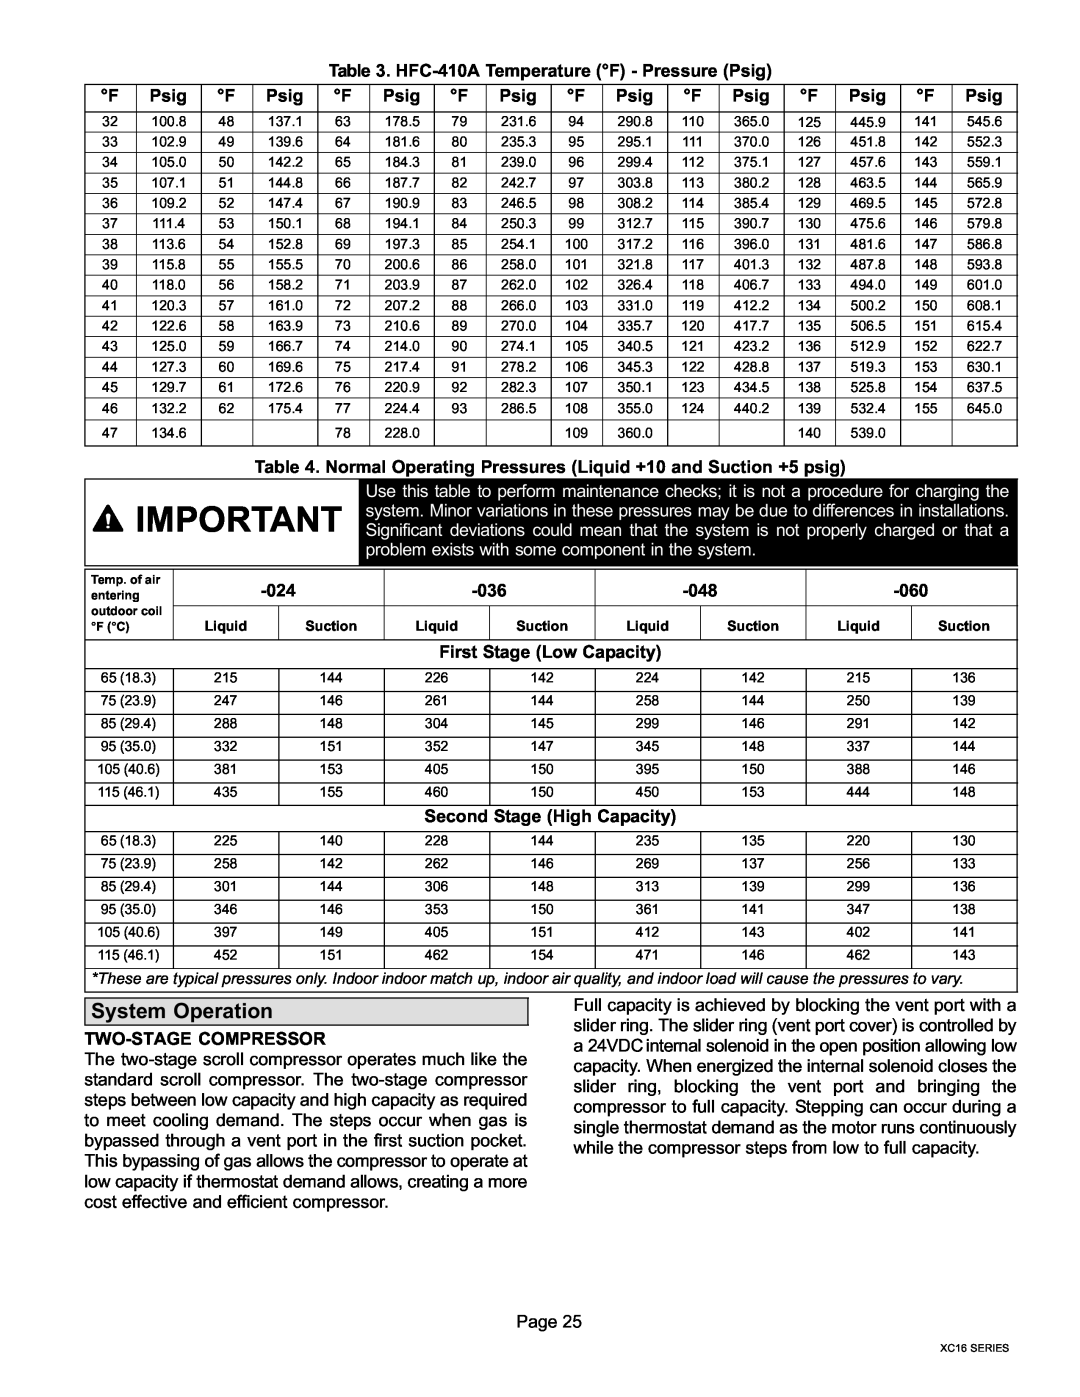 Lenox Elite Series X16 Air Conditioner Units, 506637-01 installation instructions System Operation 